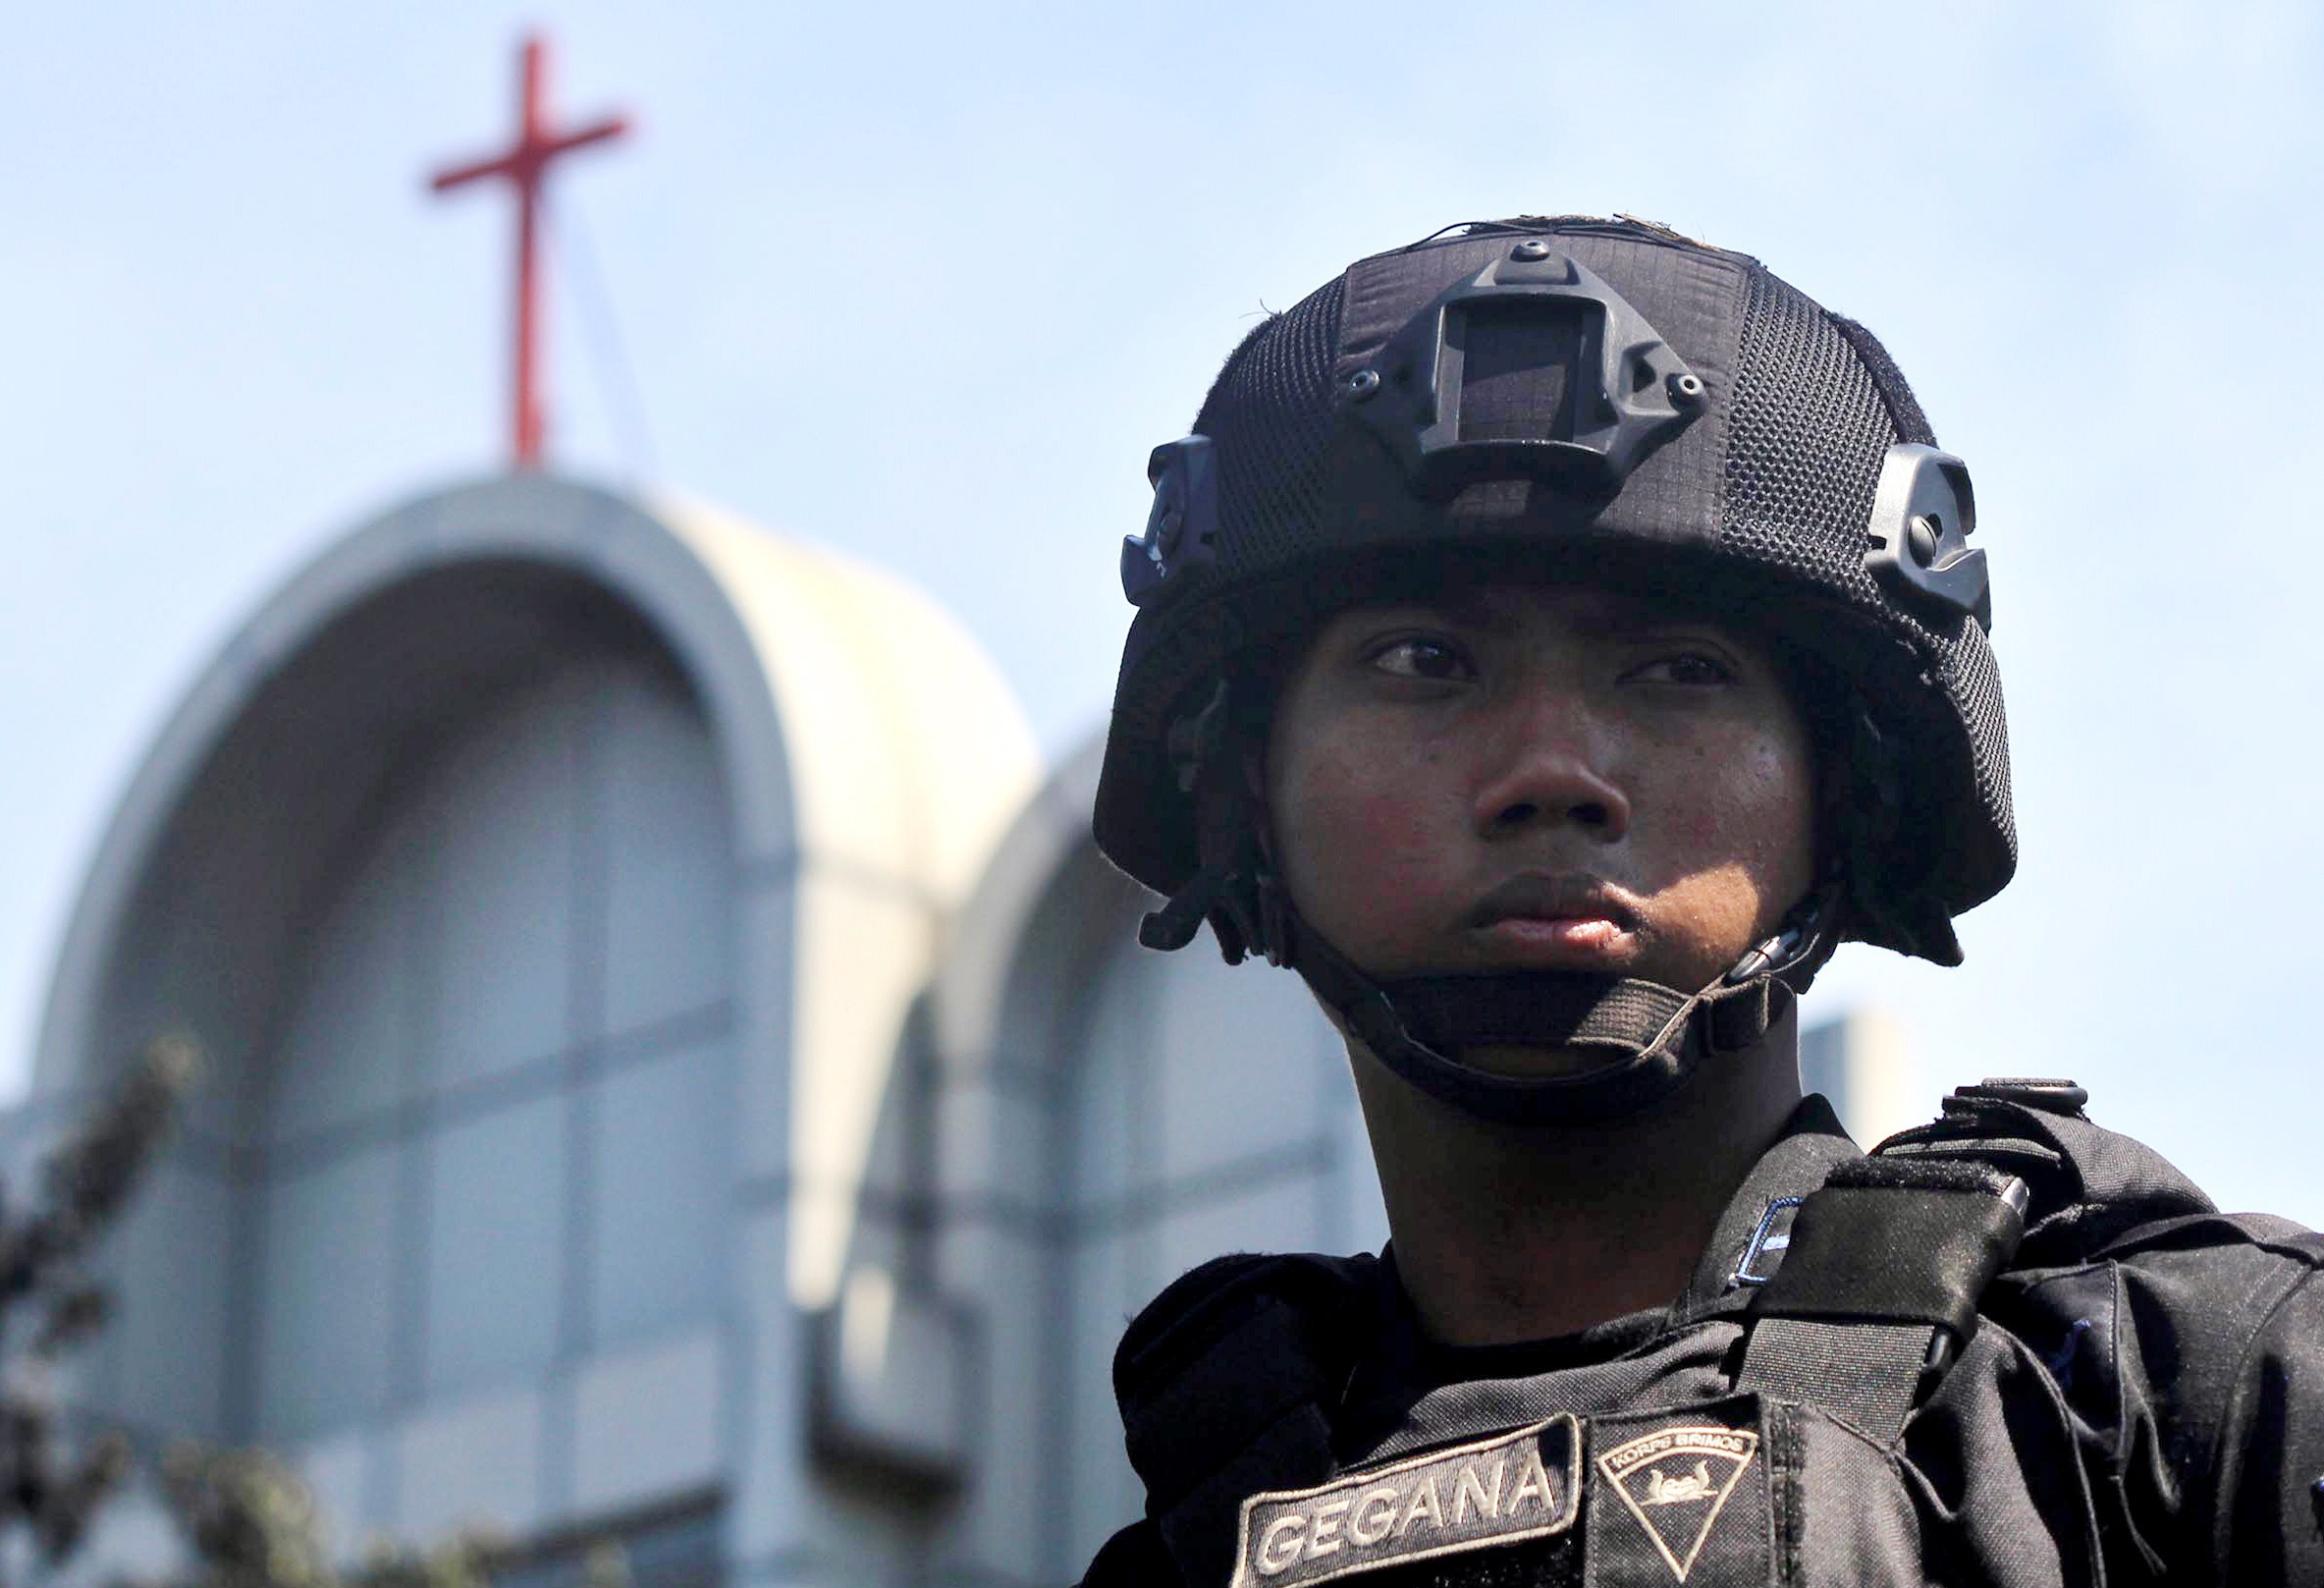 An Indonesian police officer stands guard in May last year near the scene of a bomb blast by a church in Surabaya, East Java, Indonesia. Photo: EPA